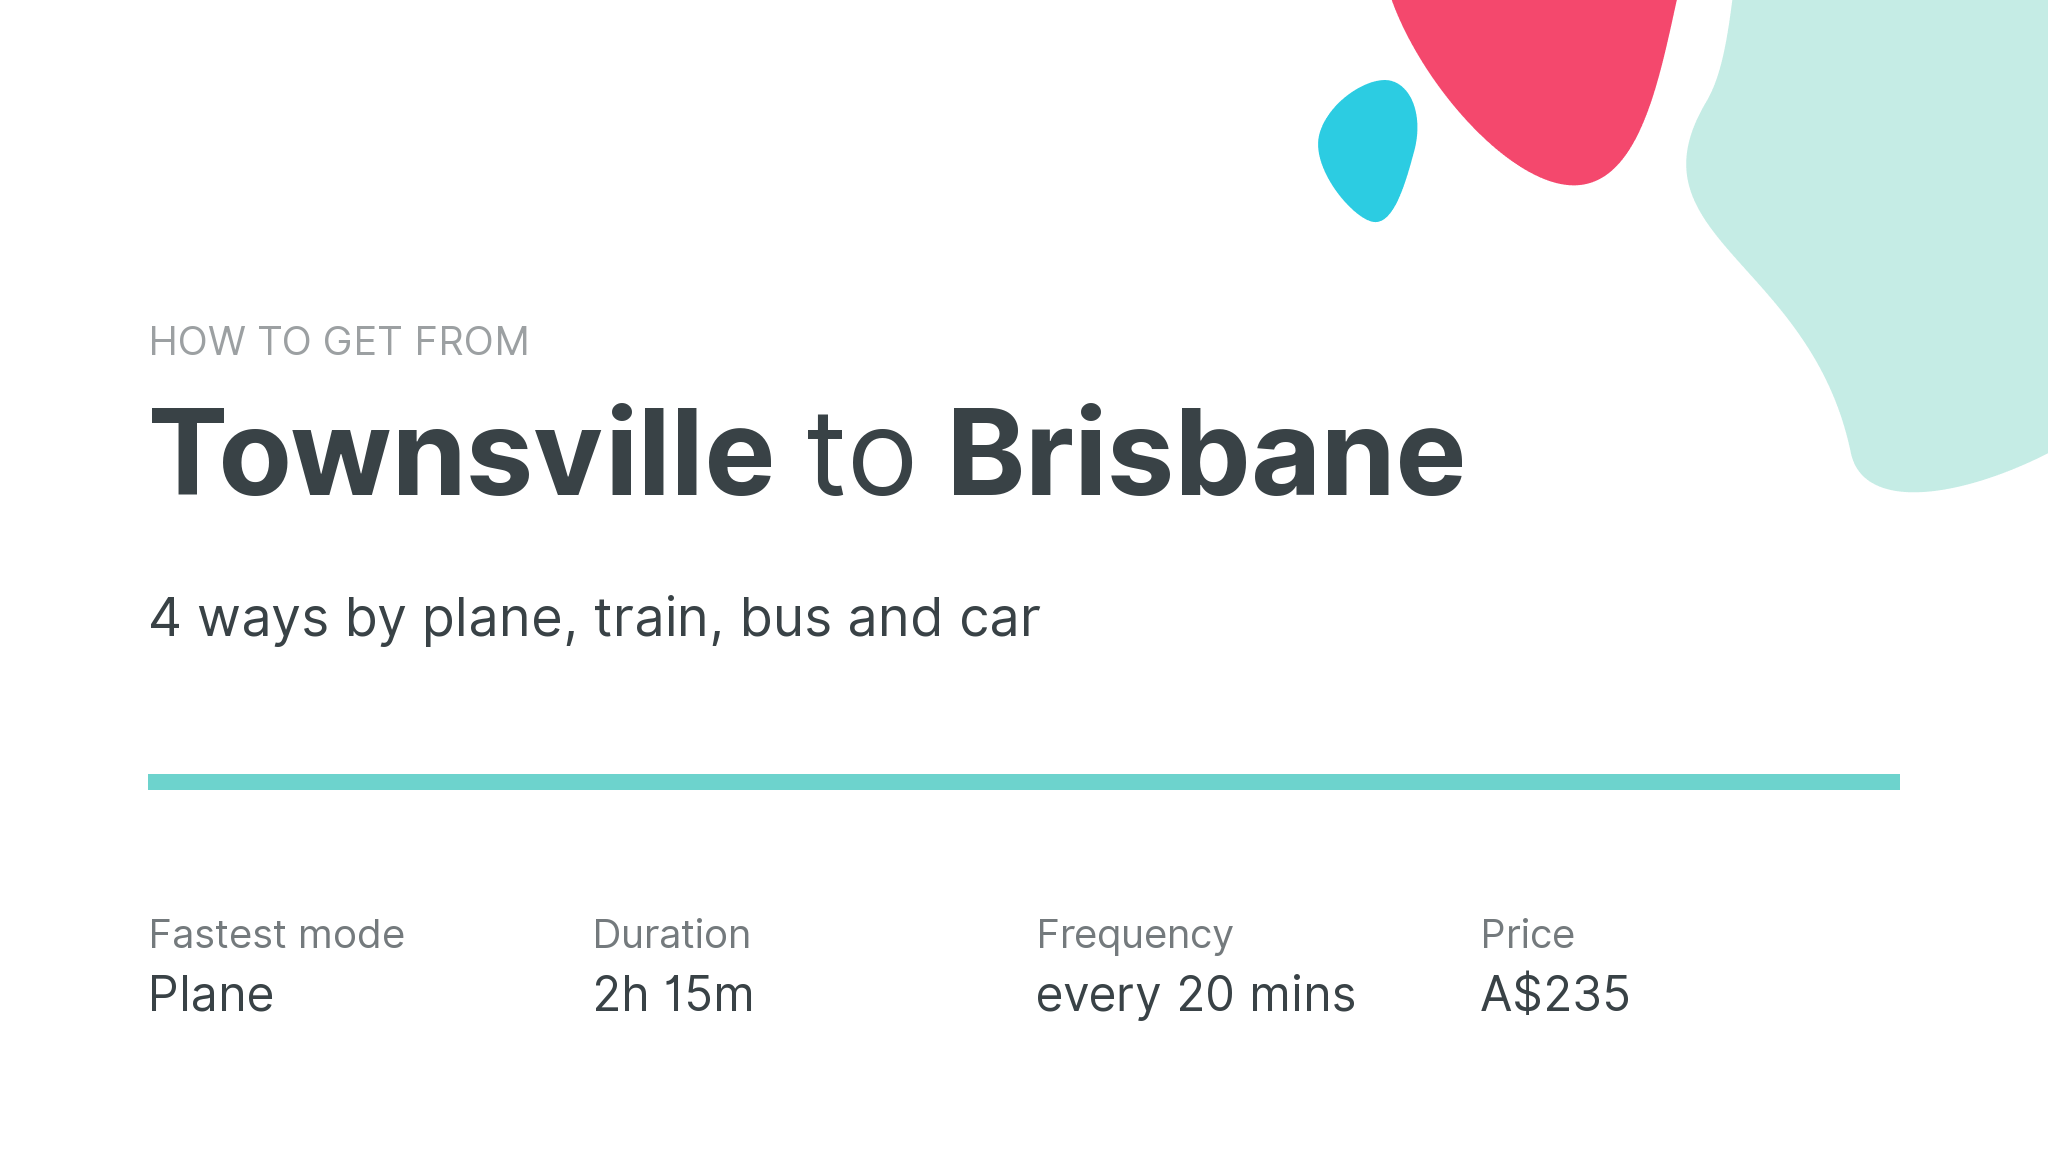 How do I get from Townsville to Brisbane